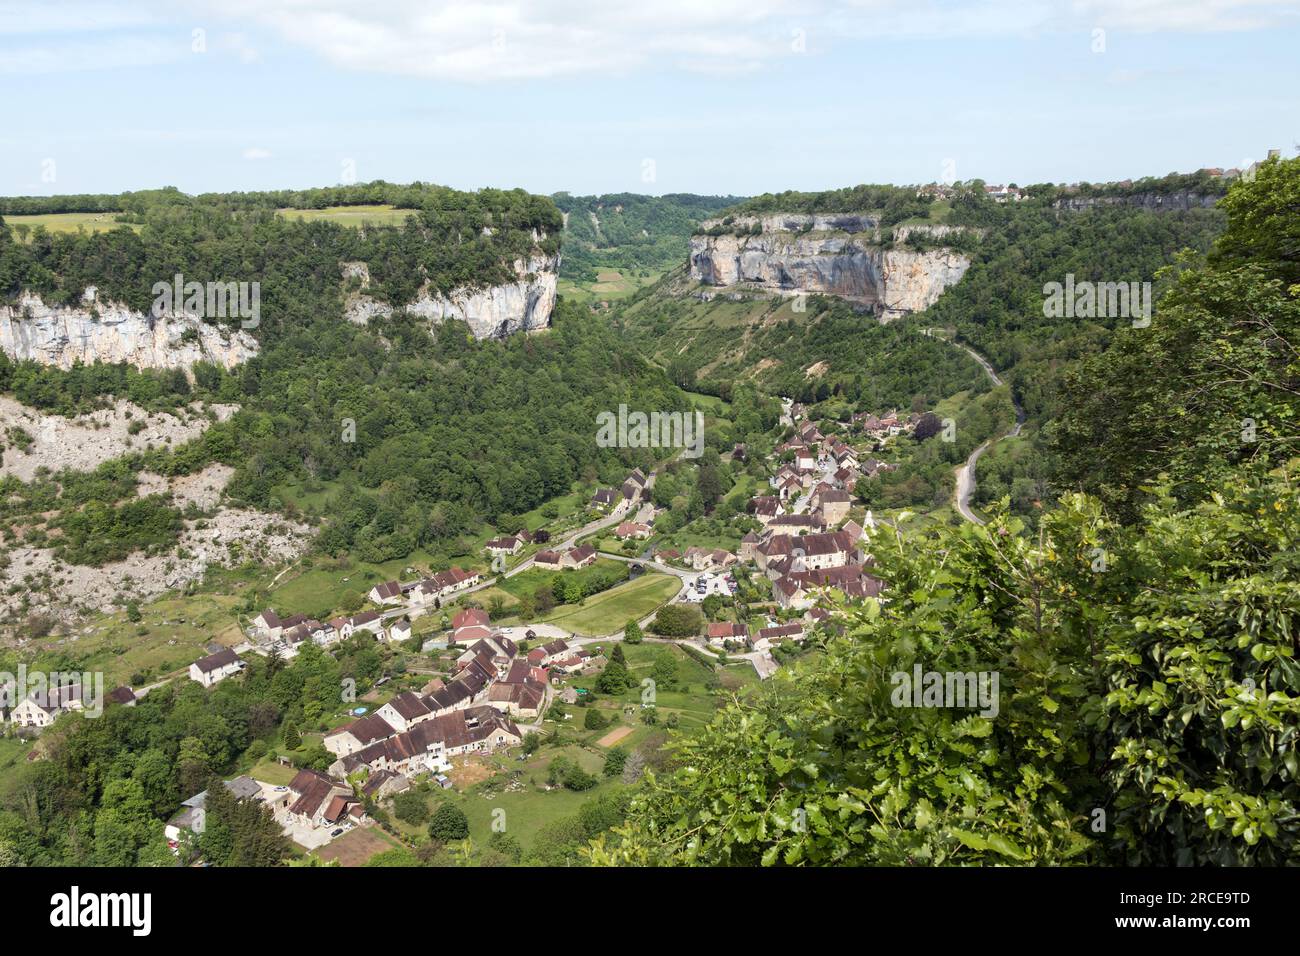 Baume-les-Messieurs and the Limestone Escarpments Surrounding the Village, Viewed from the Cirque de Messiers Trail, Jura, Bourgogne, France Stock Photo